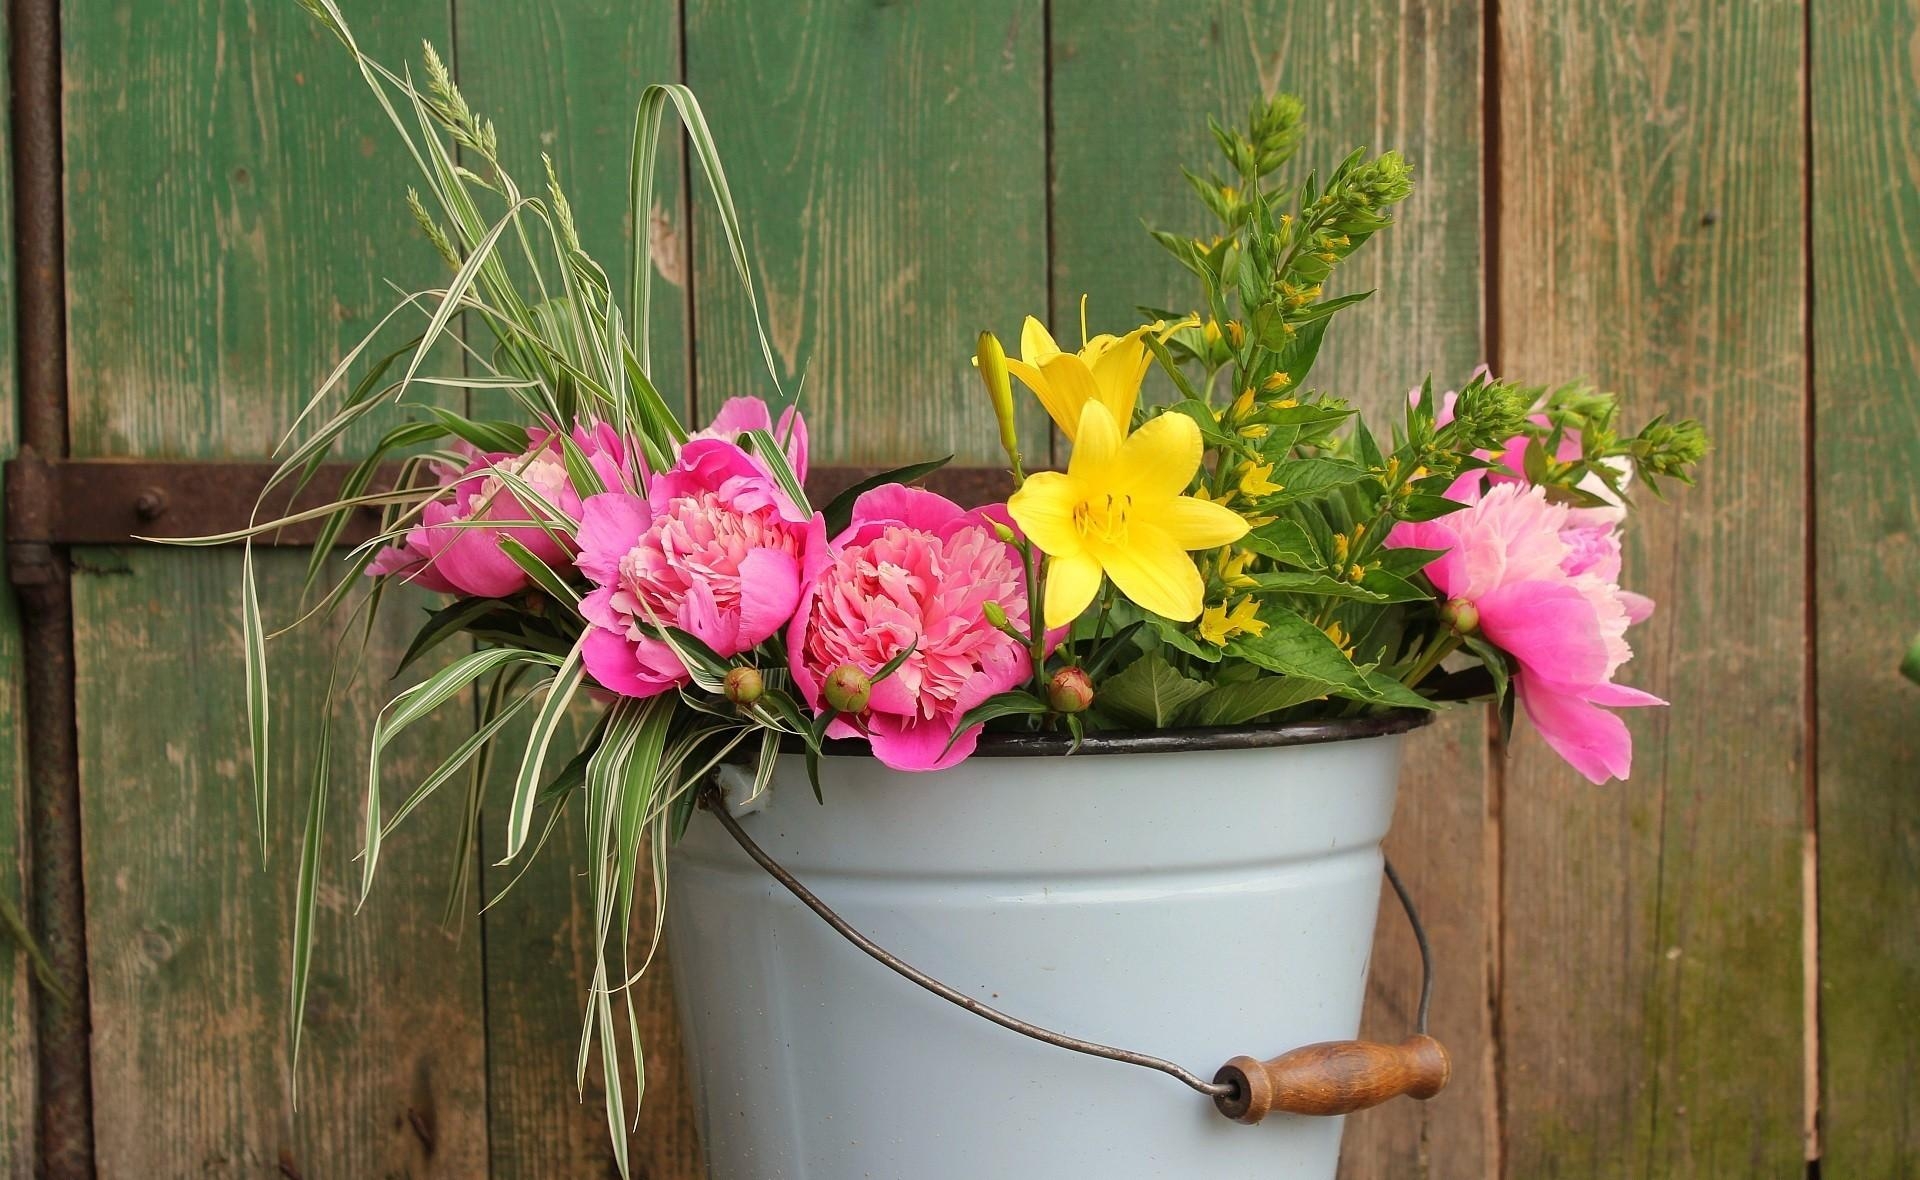 flowers, peonies, greens, fence, lily, bucket